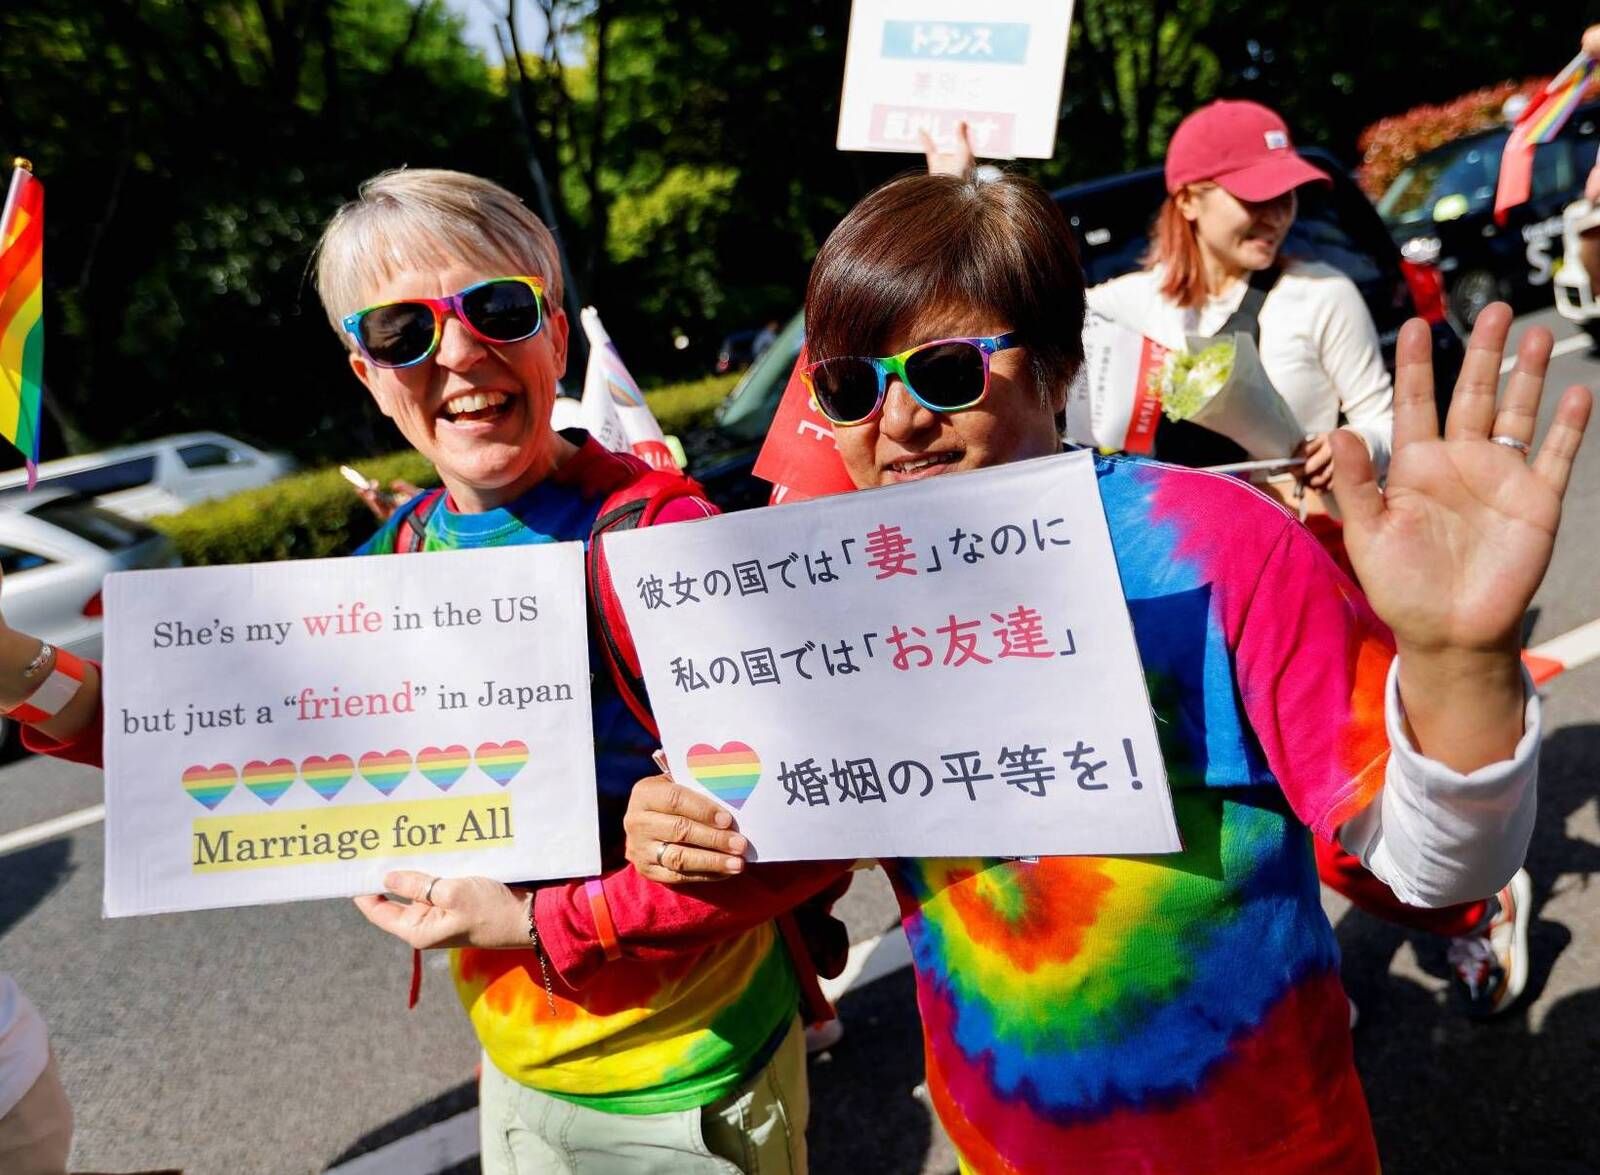 Deep Dive from The Japan Times / Is Japan going to legalize same-sex marriage?